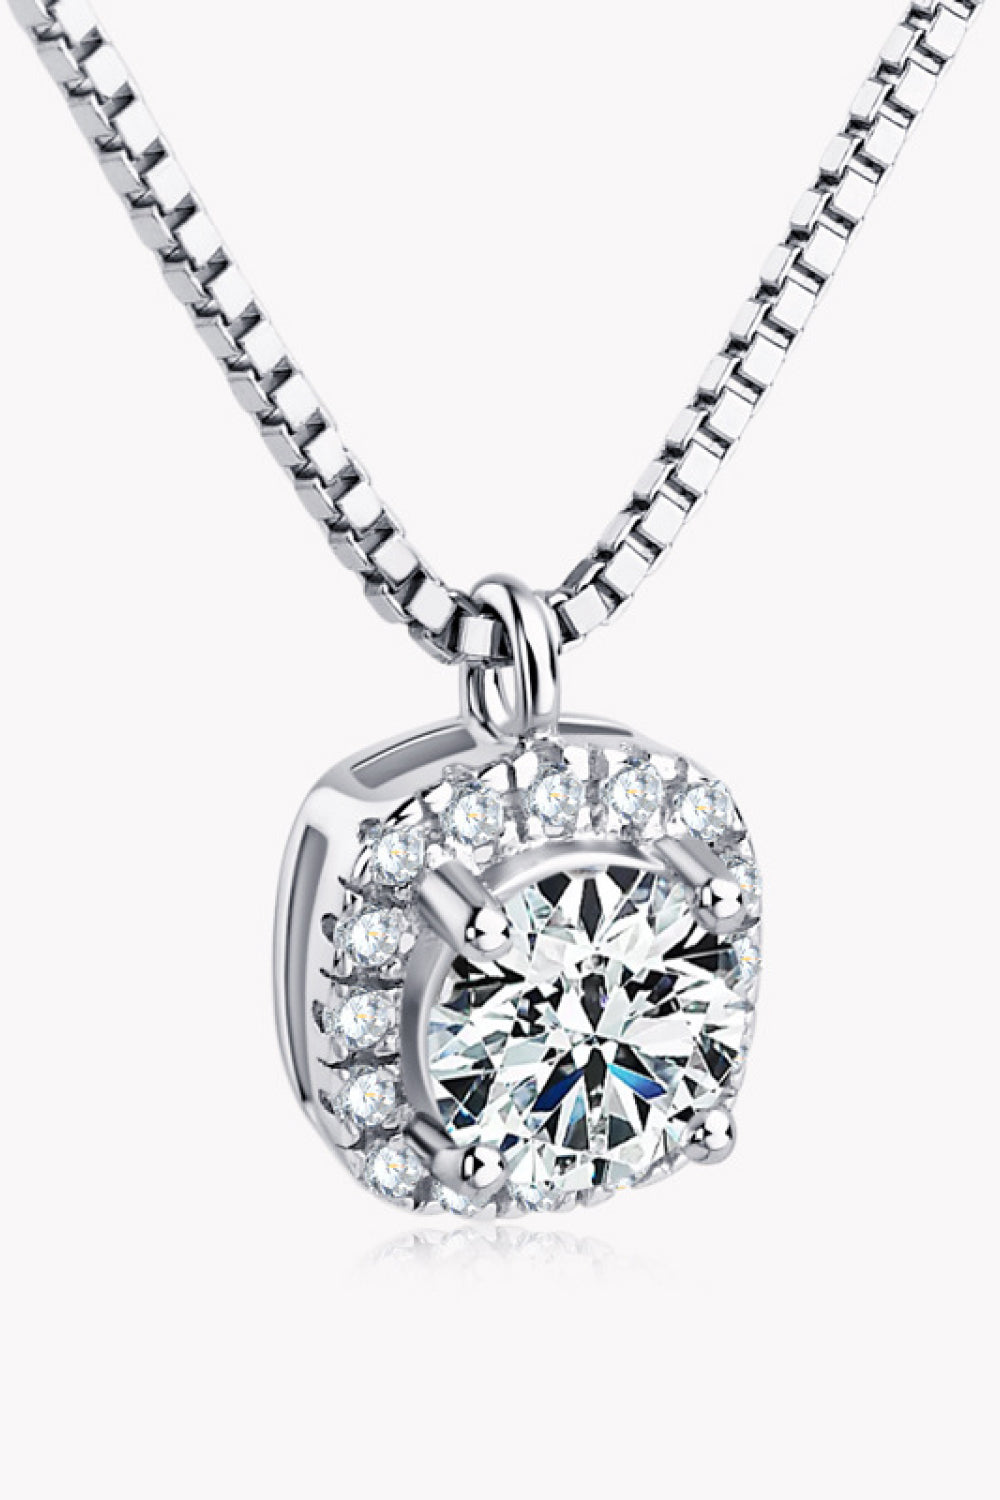 Moissanite Pendant Platinum-Plated Necklace - Necklaces - FITGGINS